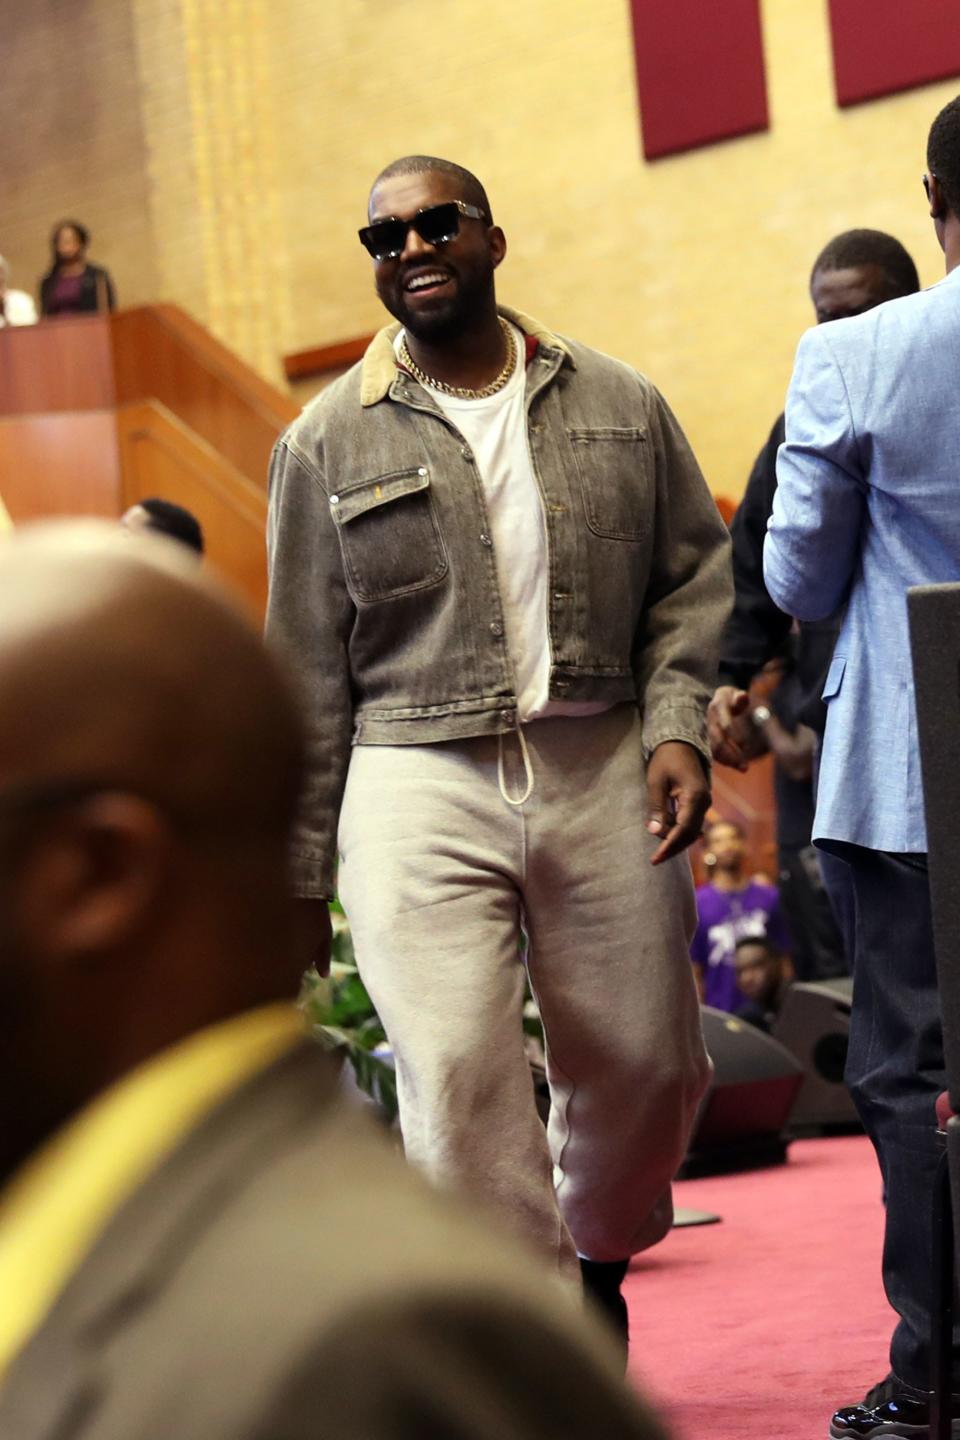 Kanye West hosts "Sunday Service" at The Greater Allen A.M.E. Cathedral of New York on September 29, 2019